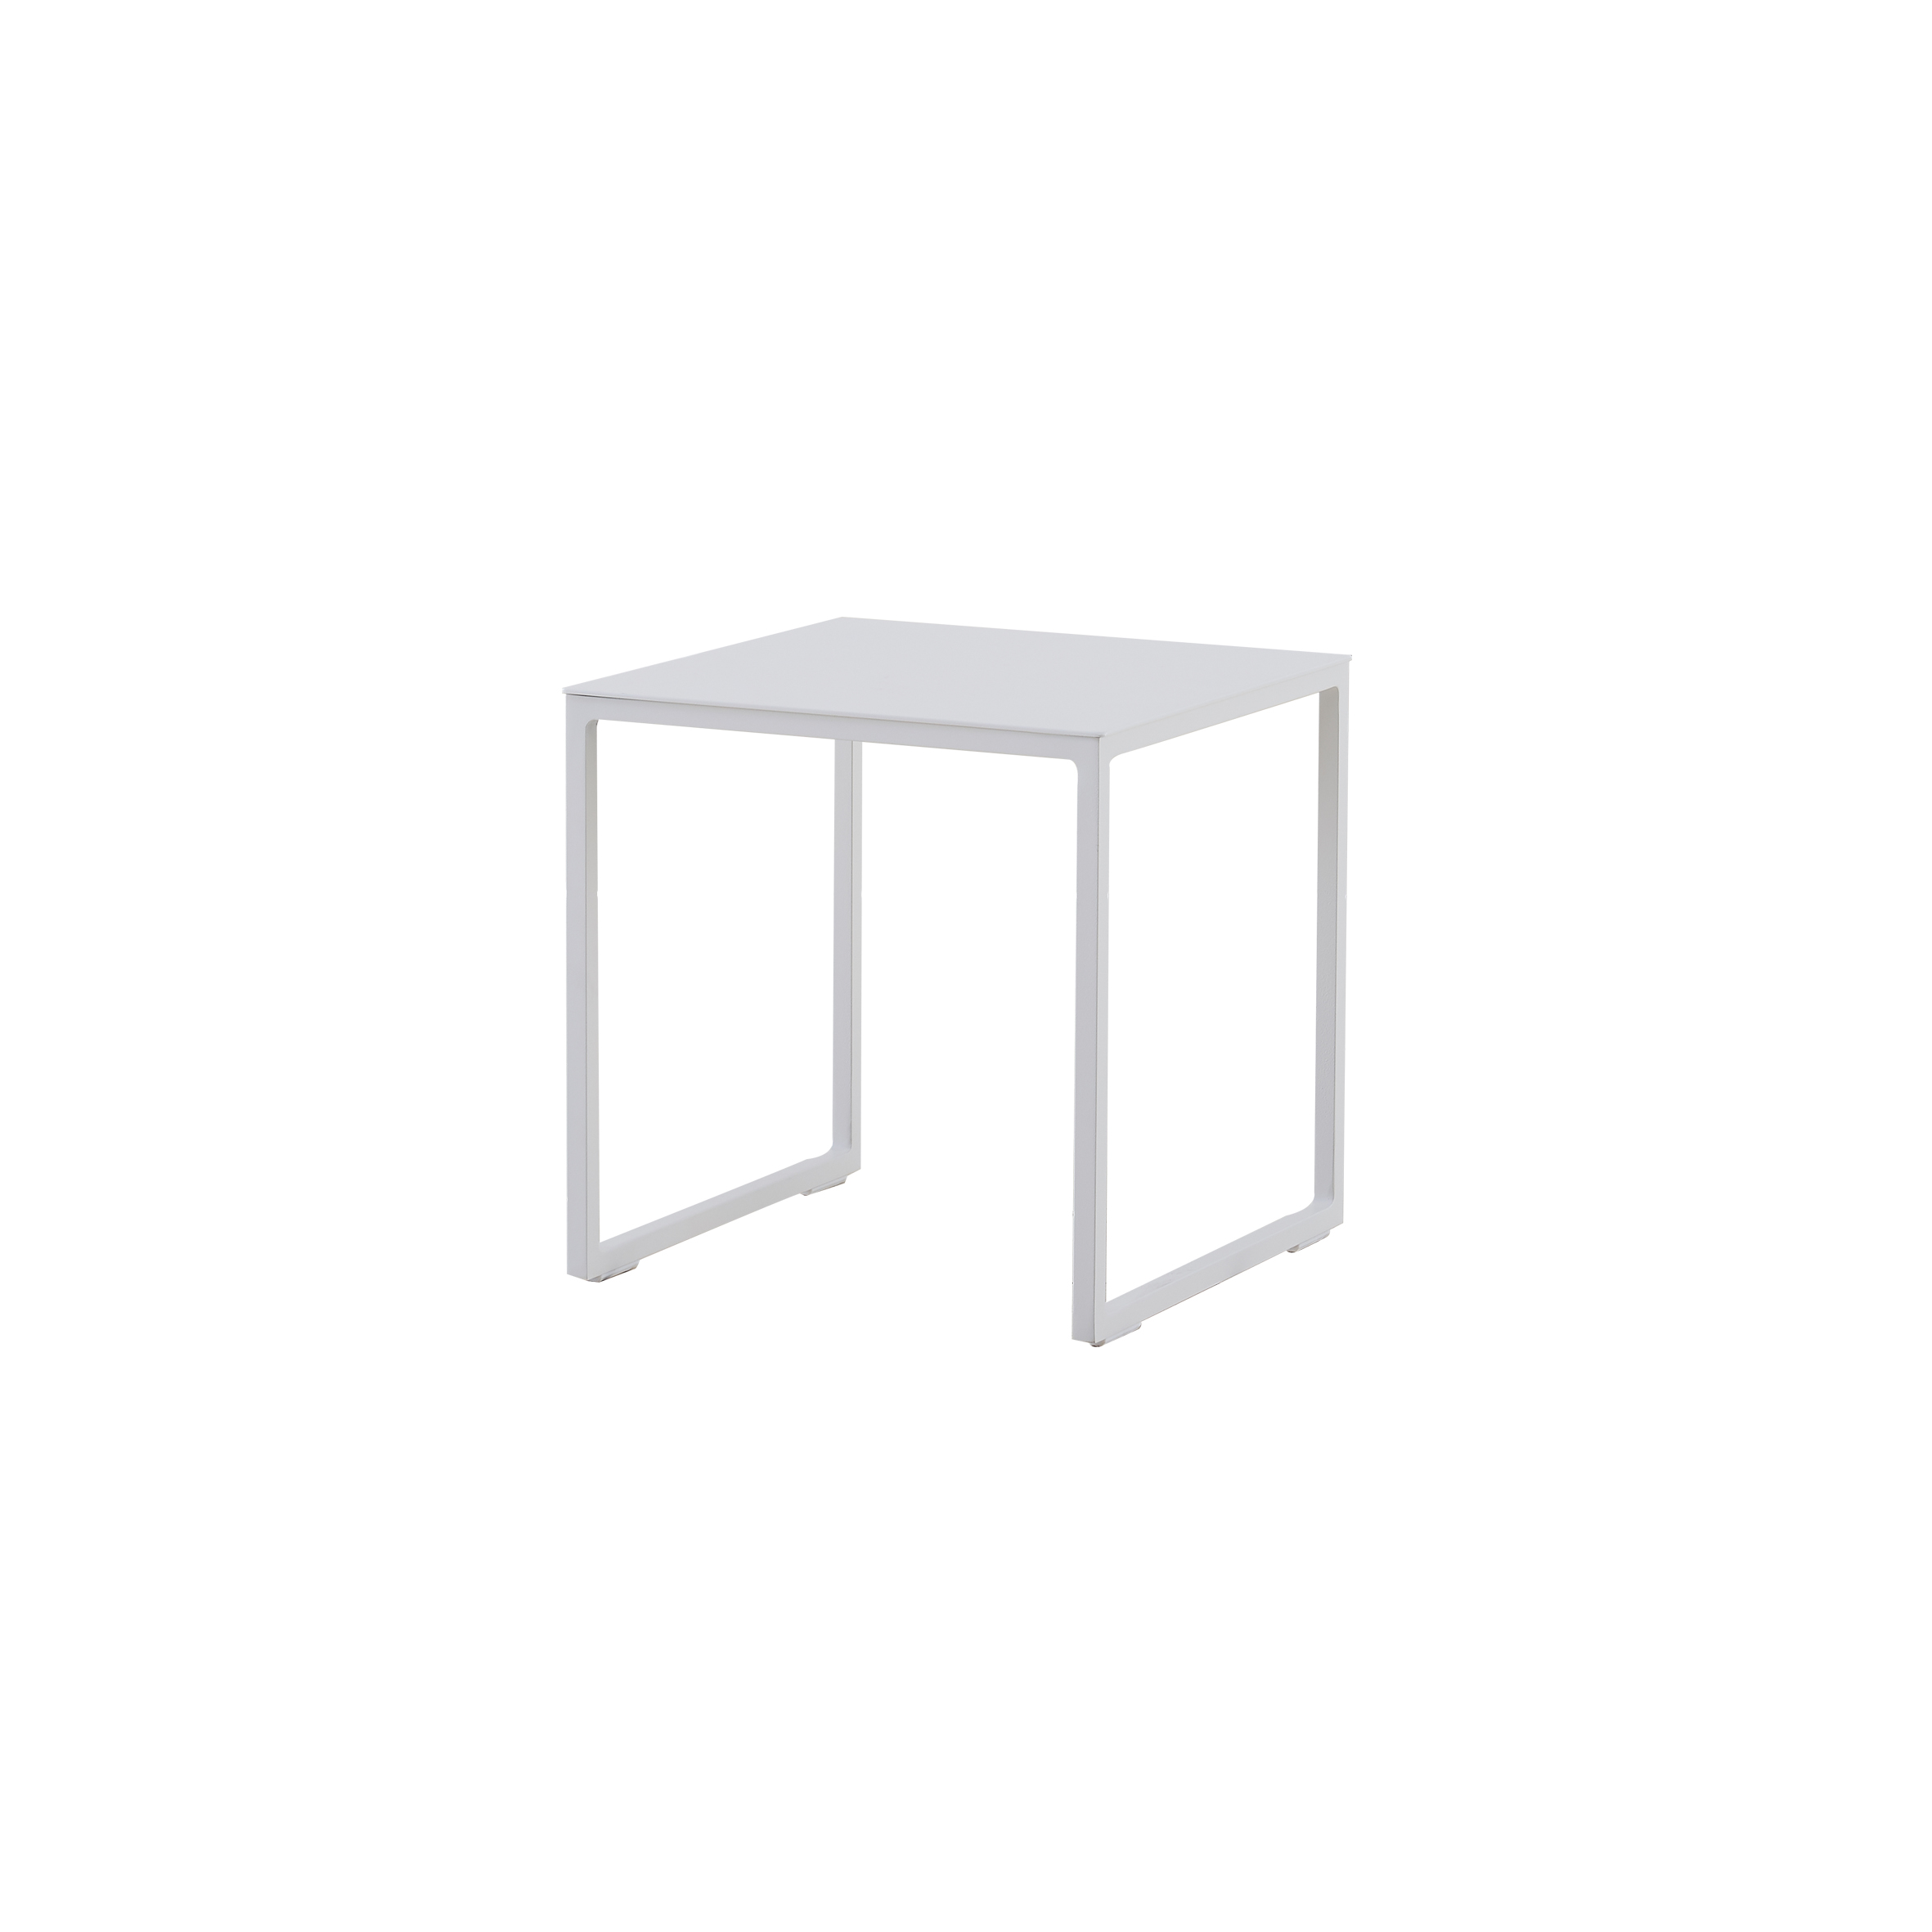 Alu d'hiver.table d'appoint S5